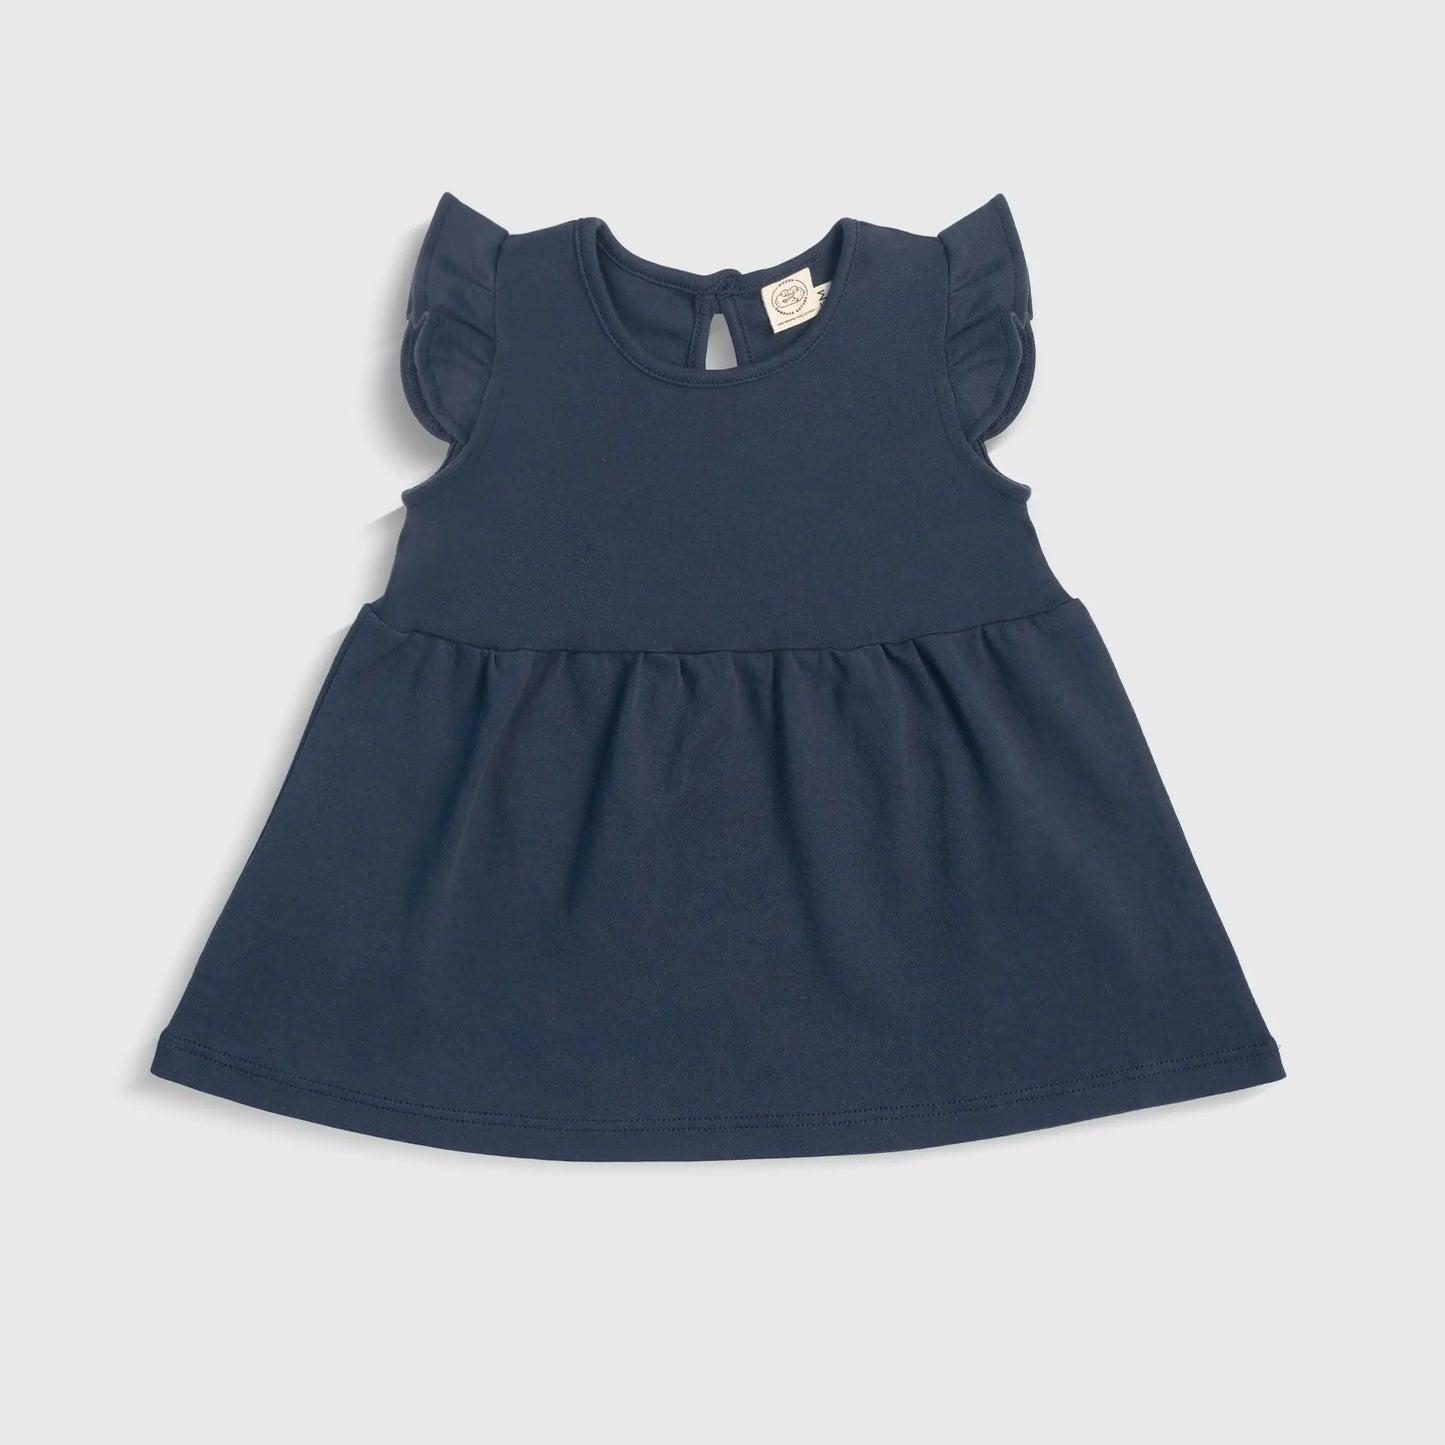 baby girl silky soft dress color navy blue